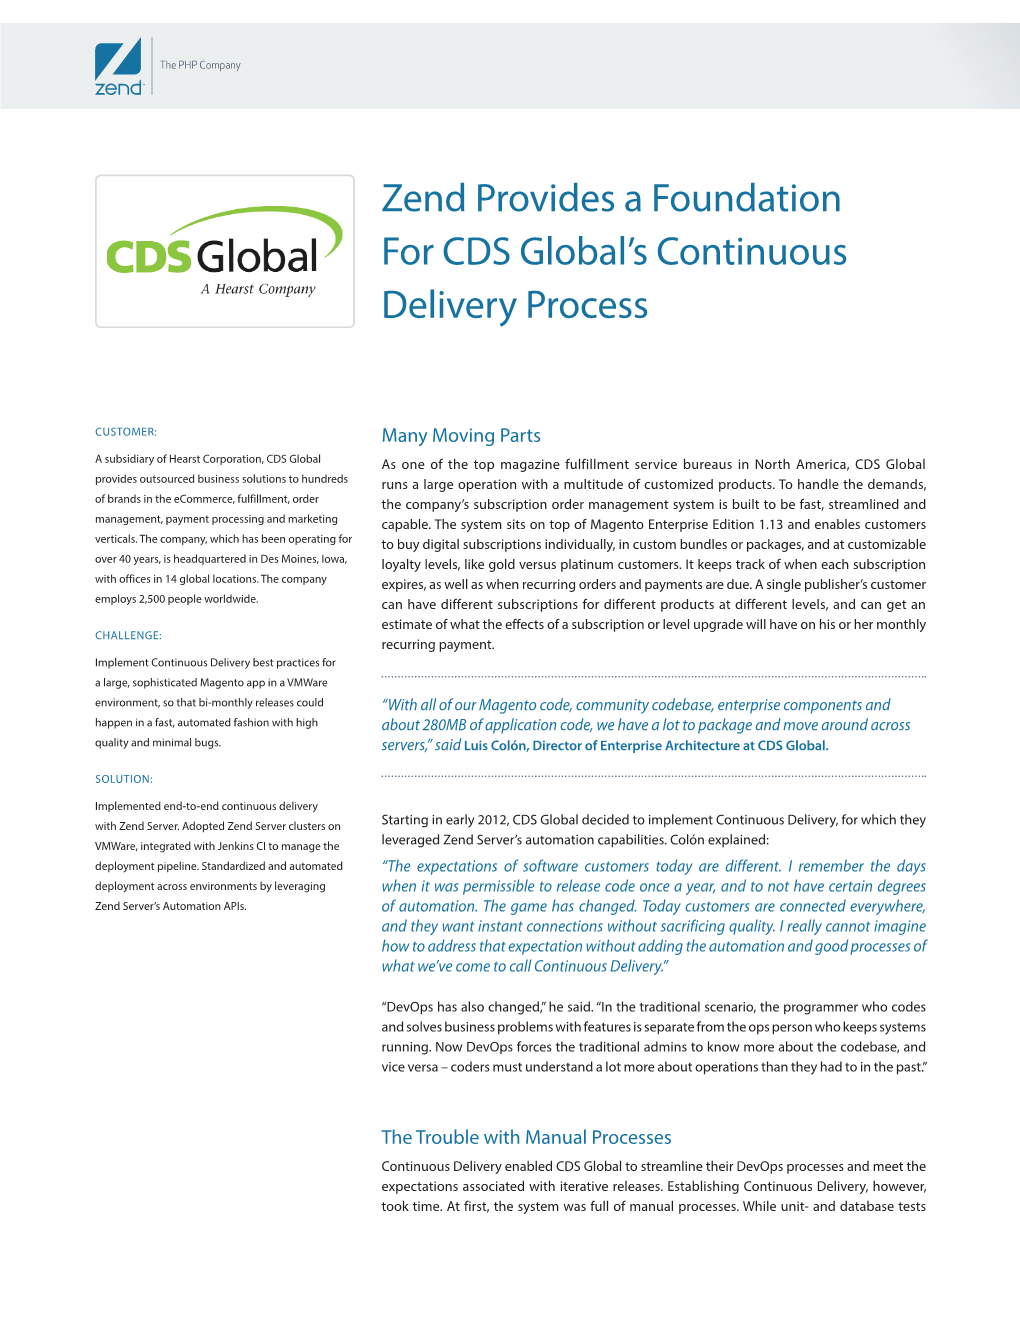 Zend Provides a Foundation for CDS Global's Continuous Delivery Process